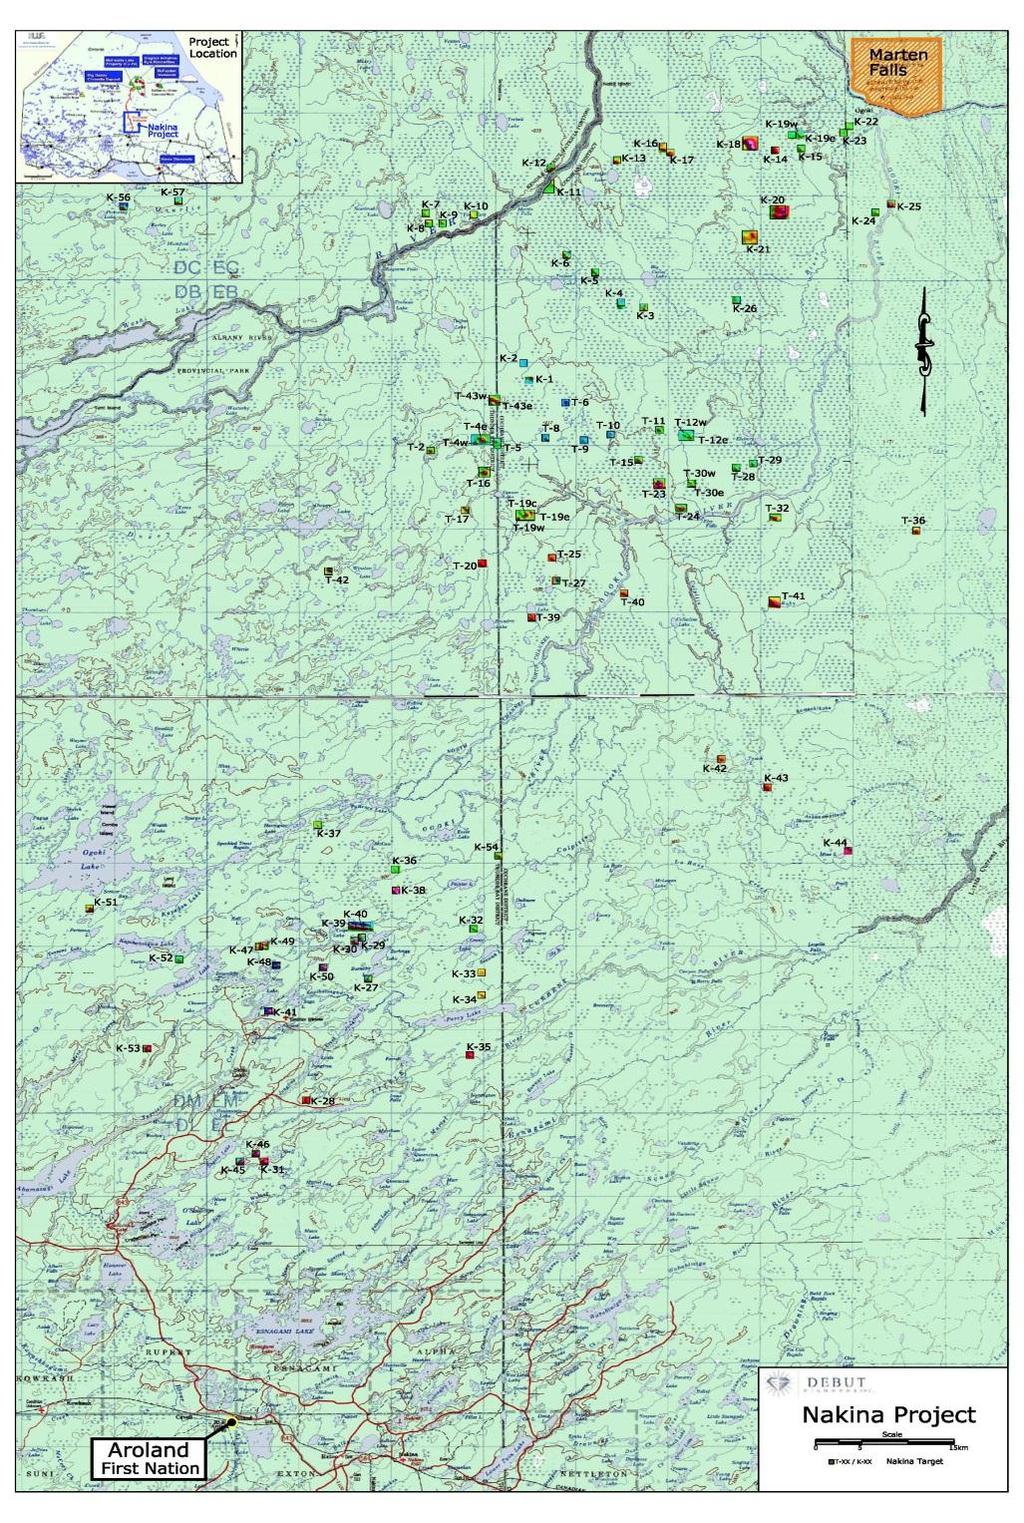 Nakina Project August 19, 2011 - Debut acquires Nakina Option to earn a 70% operating interest in 28 unpatented mining claims, located 125 km.